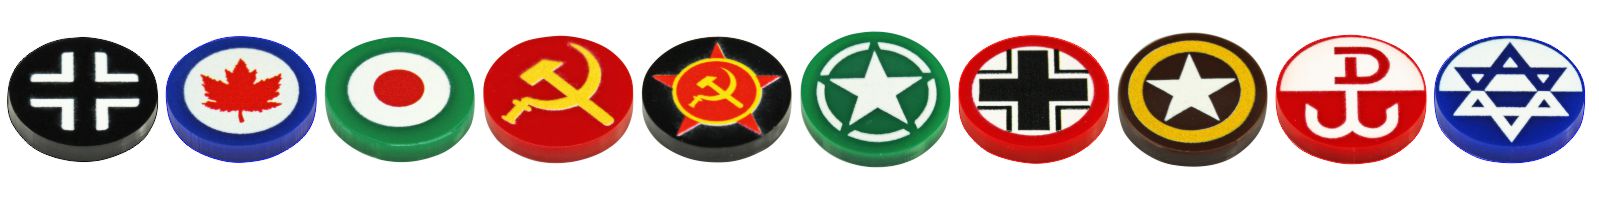 More Faction Tokens for Your World War Two Games